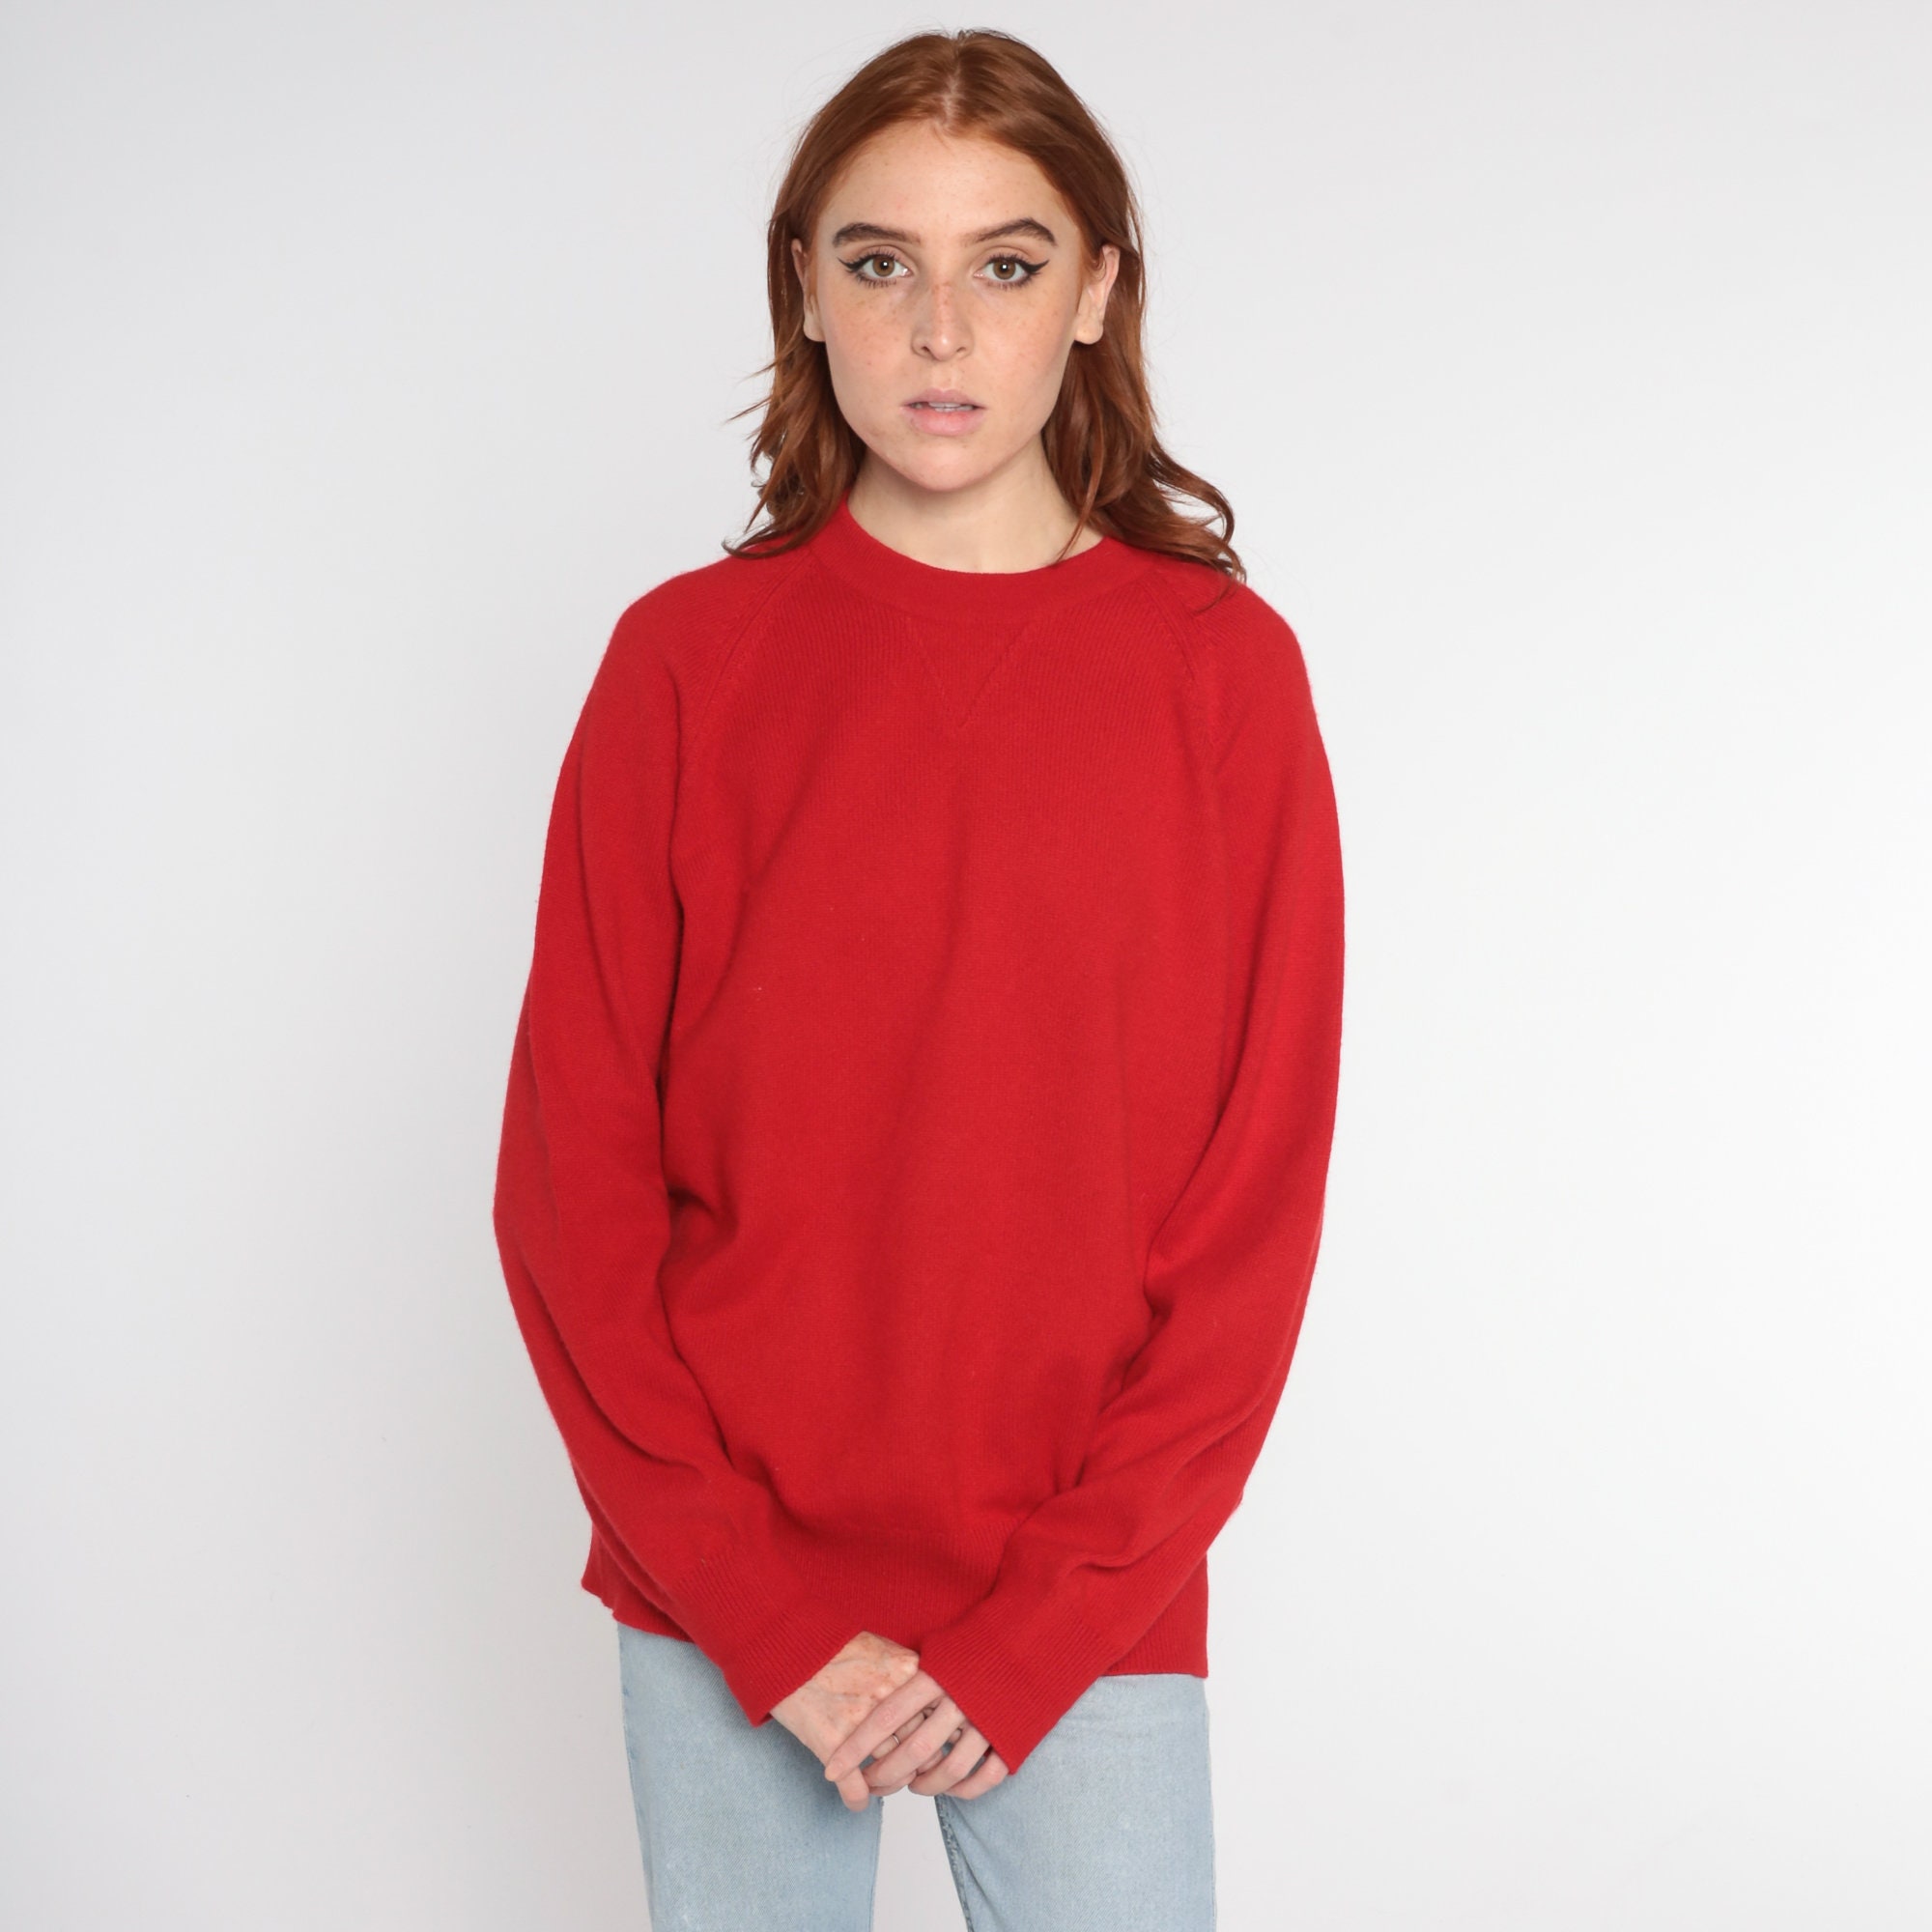 Red Cashmere Sweater 90s Plain Knit Pullover Sweater Basic Simple ...